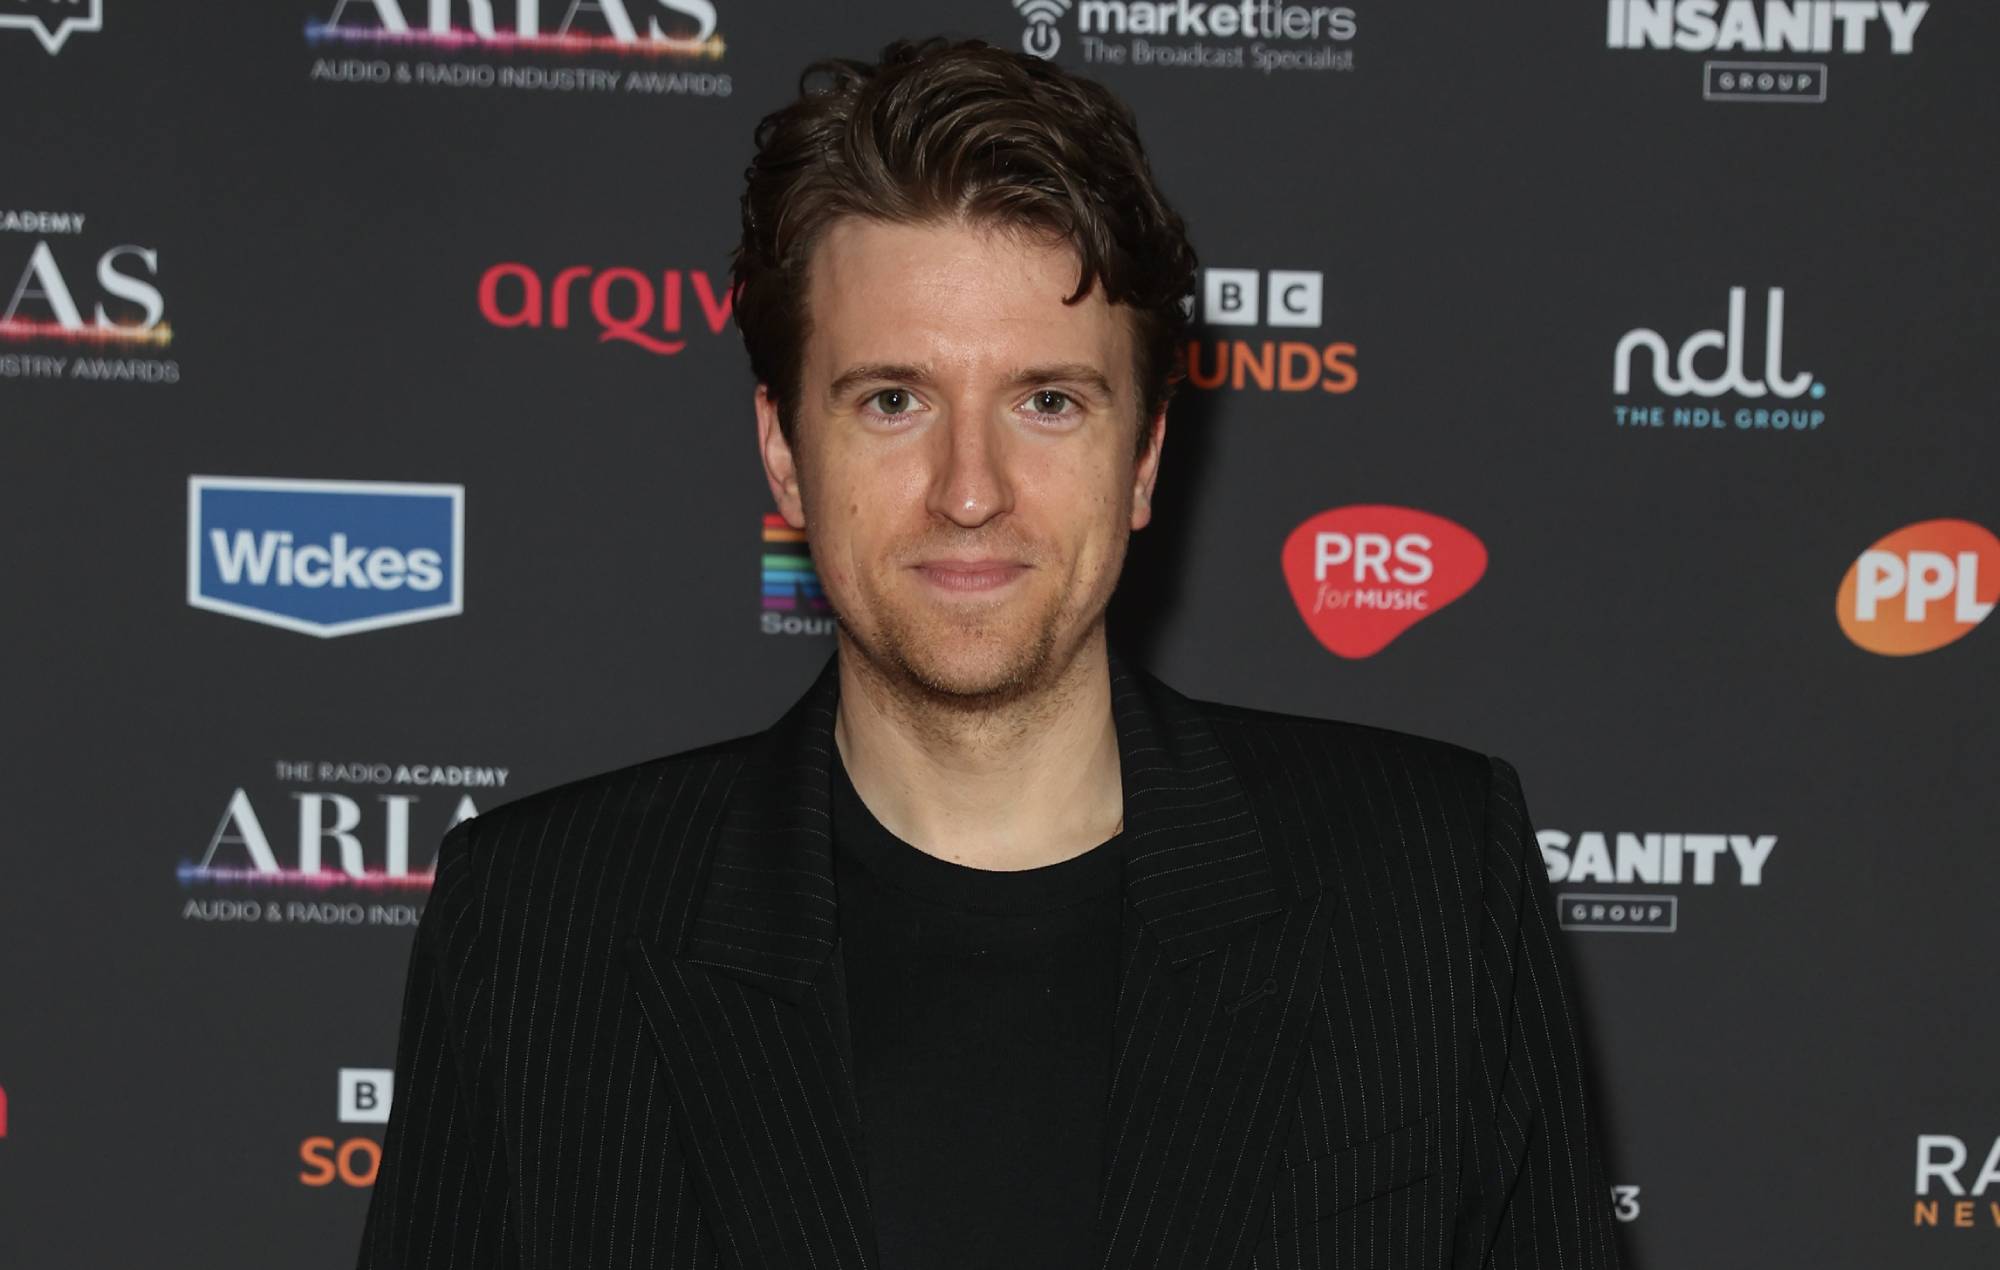 Greg James apologises for “ableist” remark about classic Roald Dahl character with “disgusting” glass eye